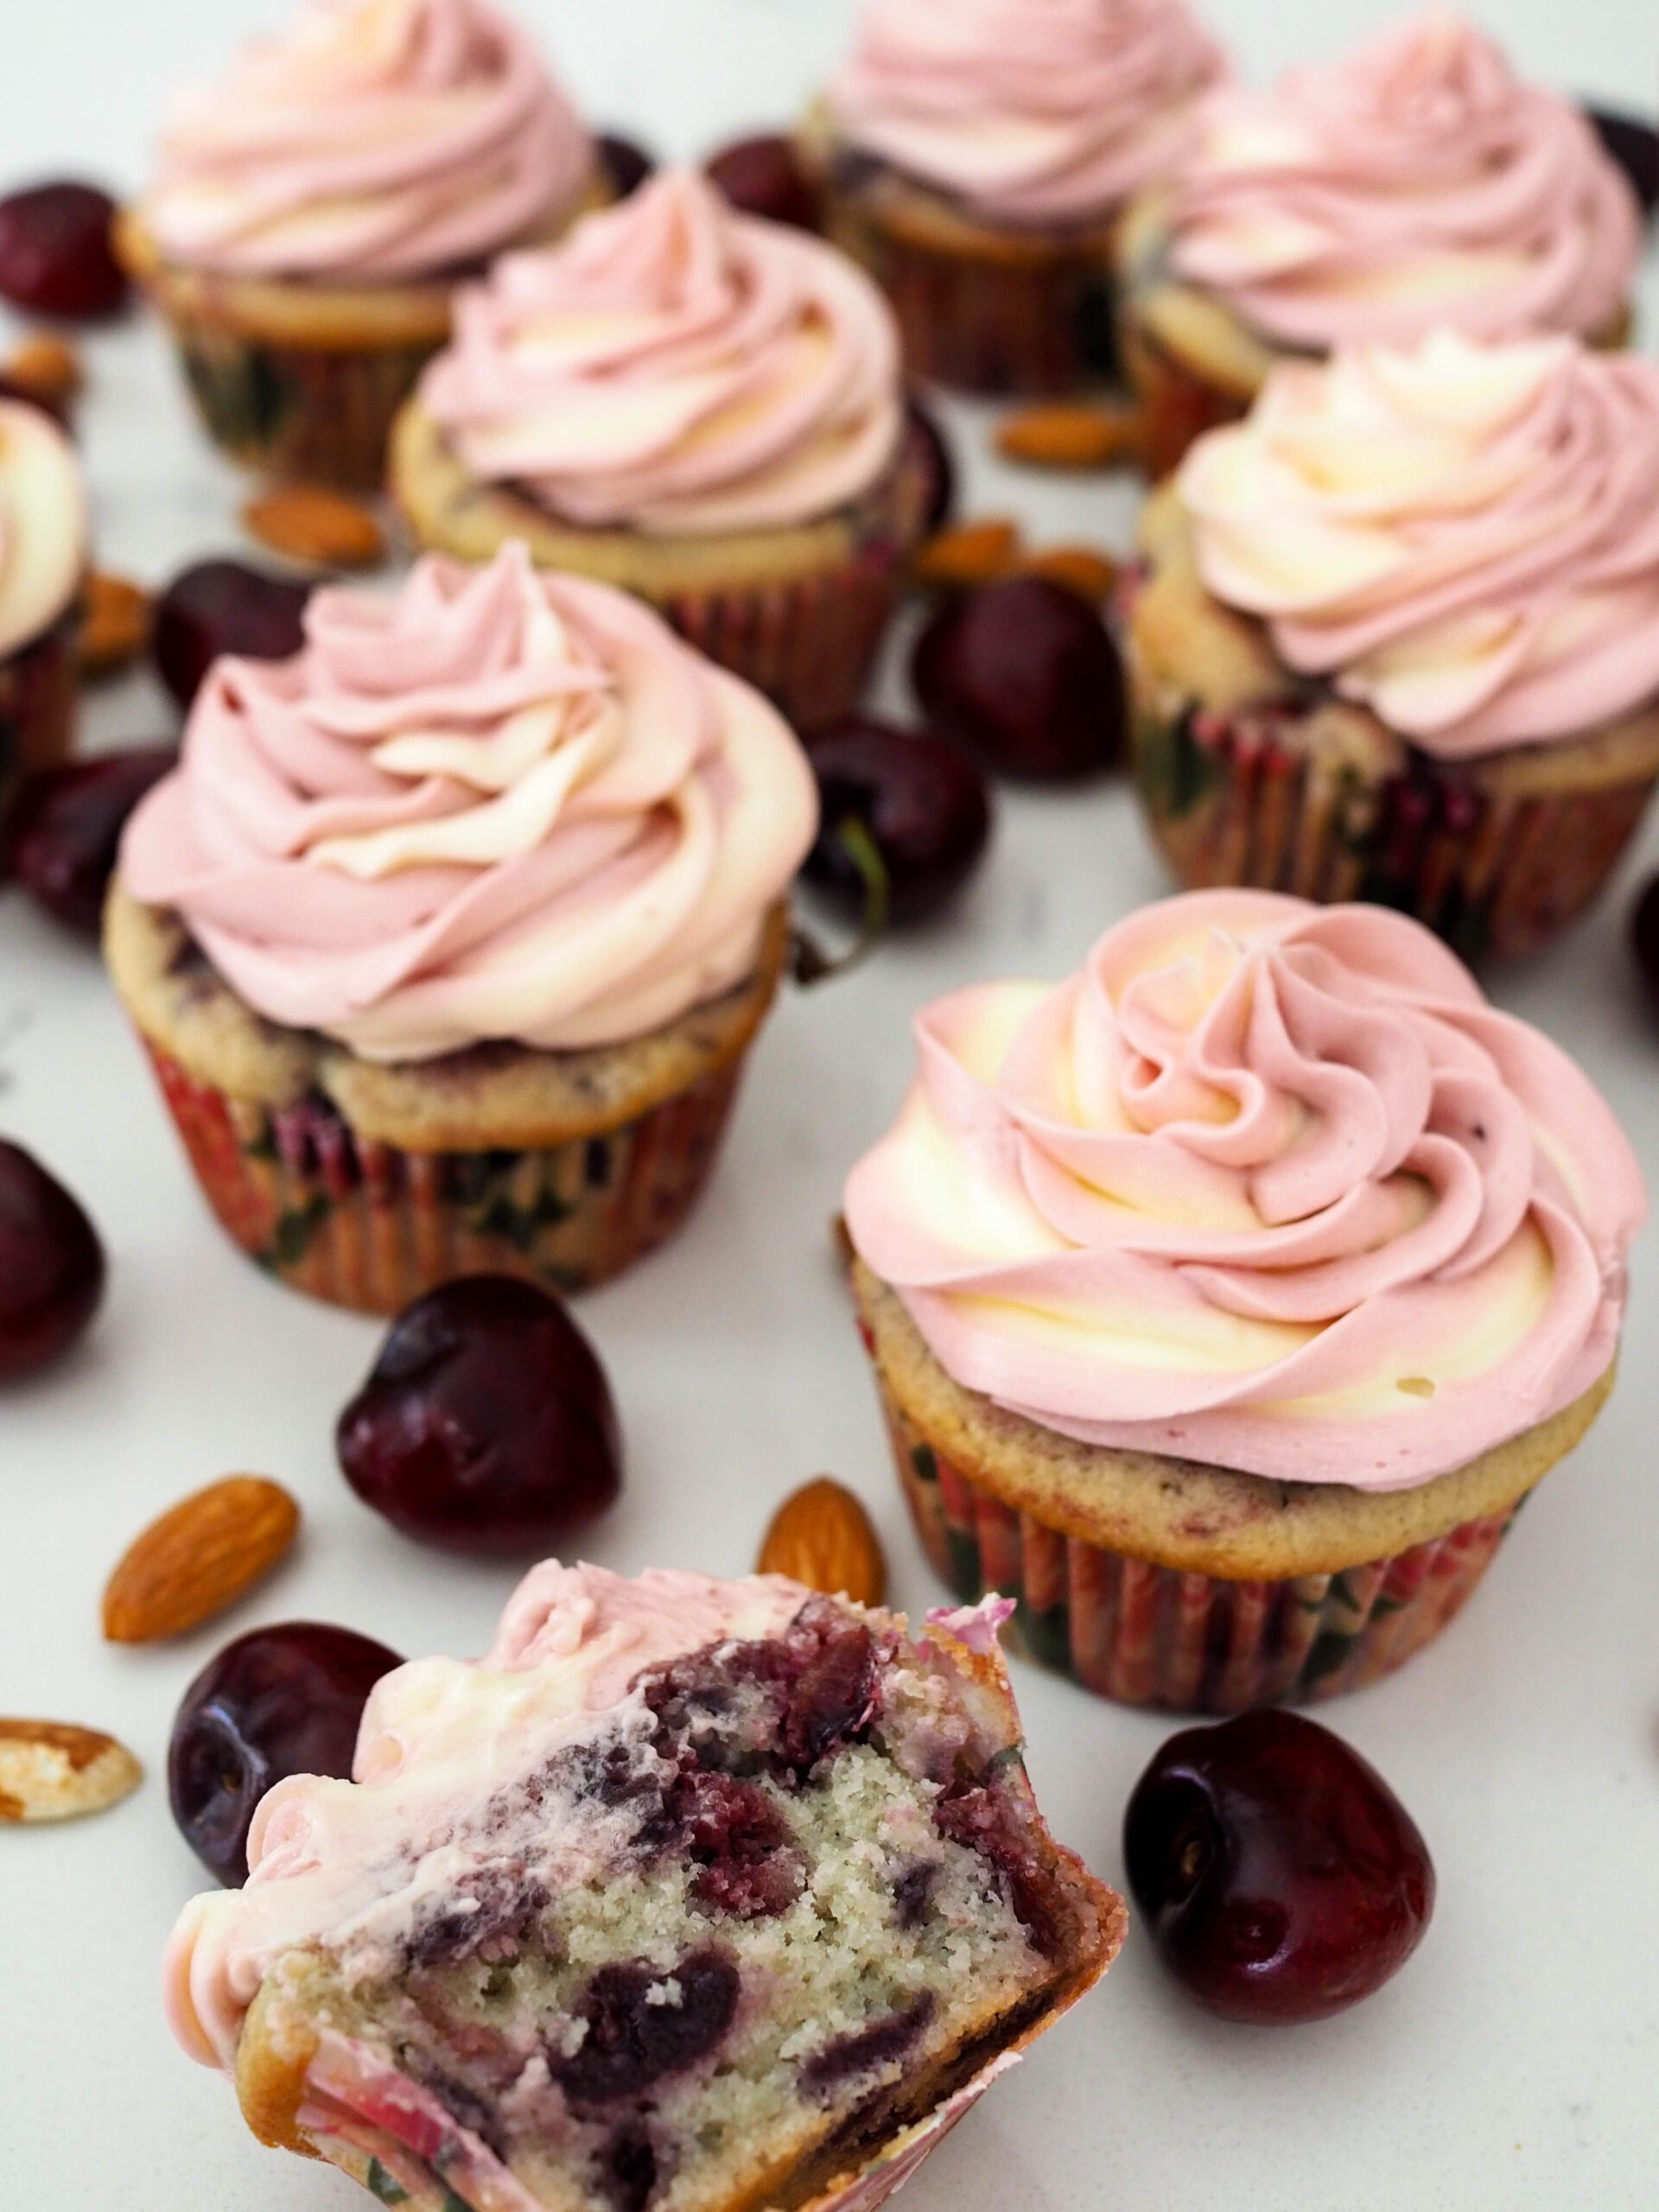 Cherry Almond Cupcakes are arranged on a white counter.